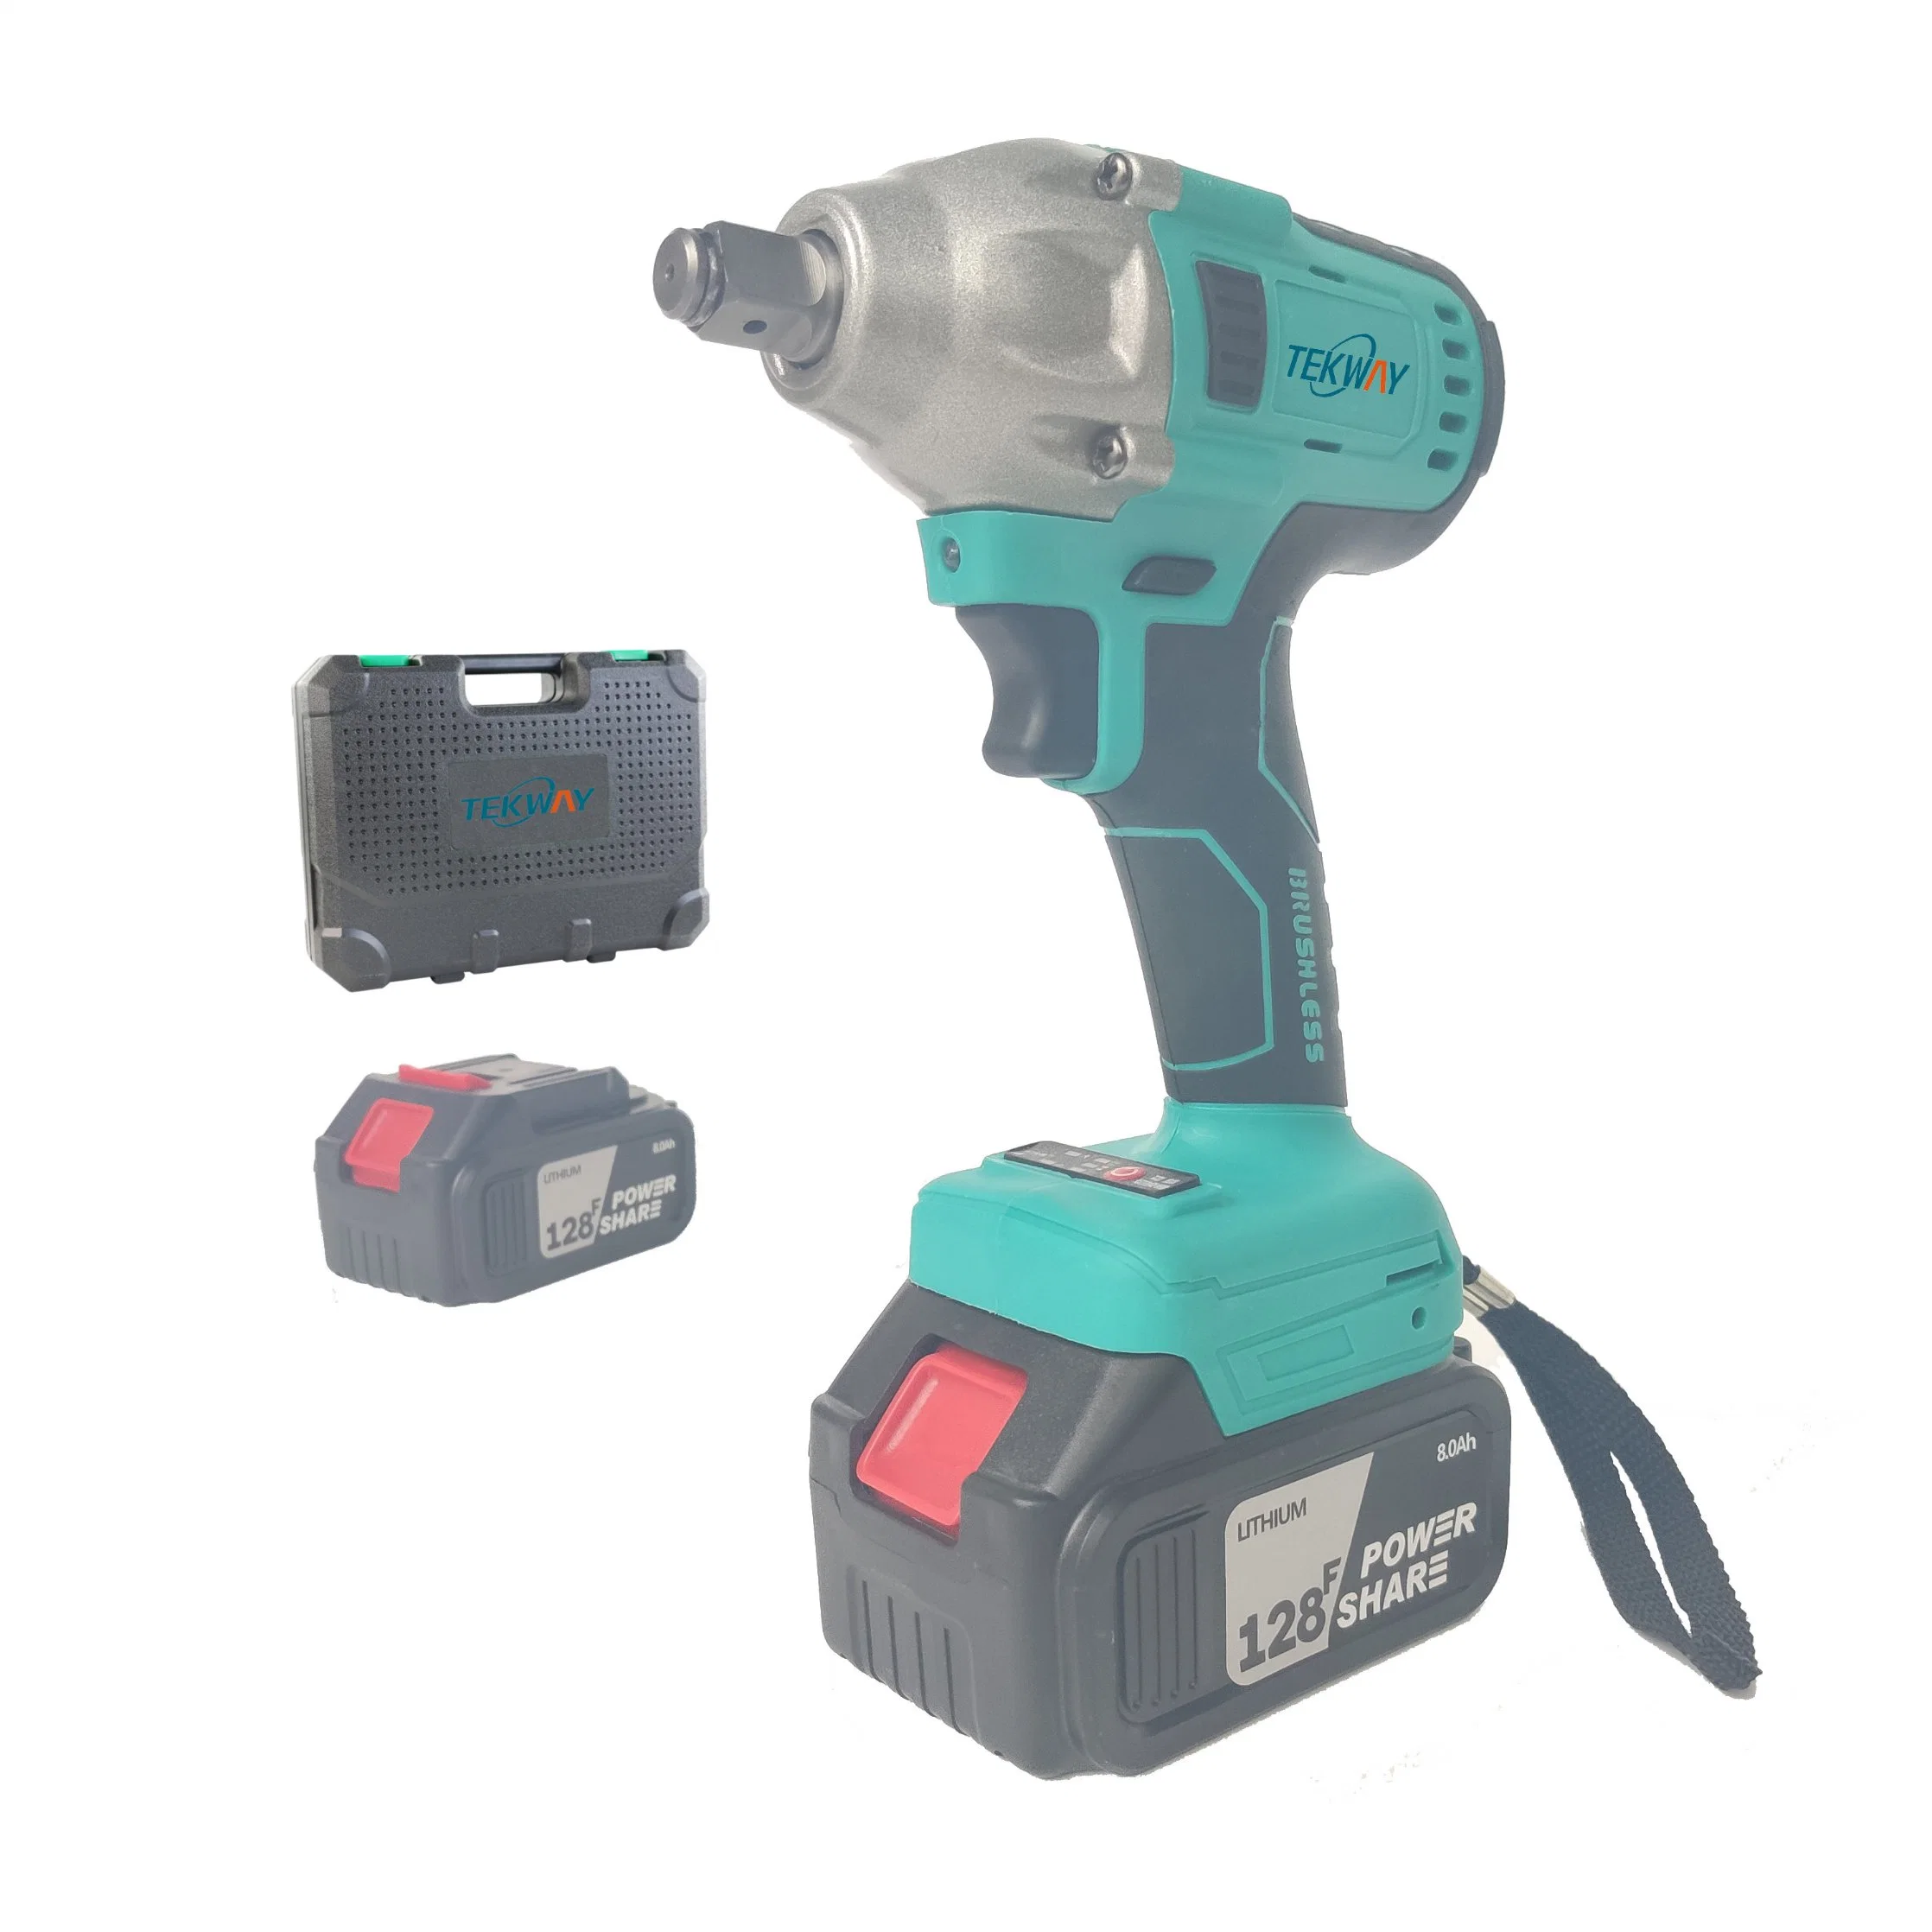 Cordless Impact Wrench, Brushless Impact Wrench 1/2 Inch Max Torque 479 FT-Lbs (650Nm) , 3300rpm